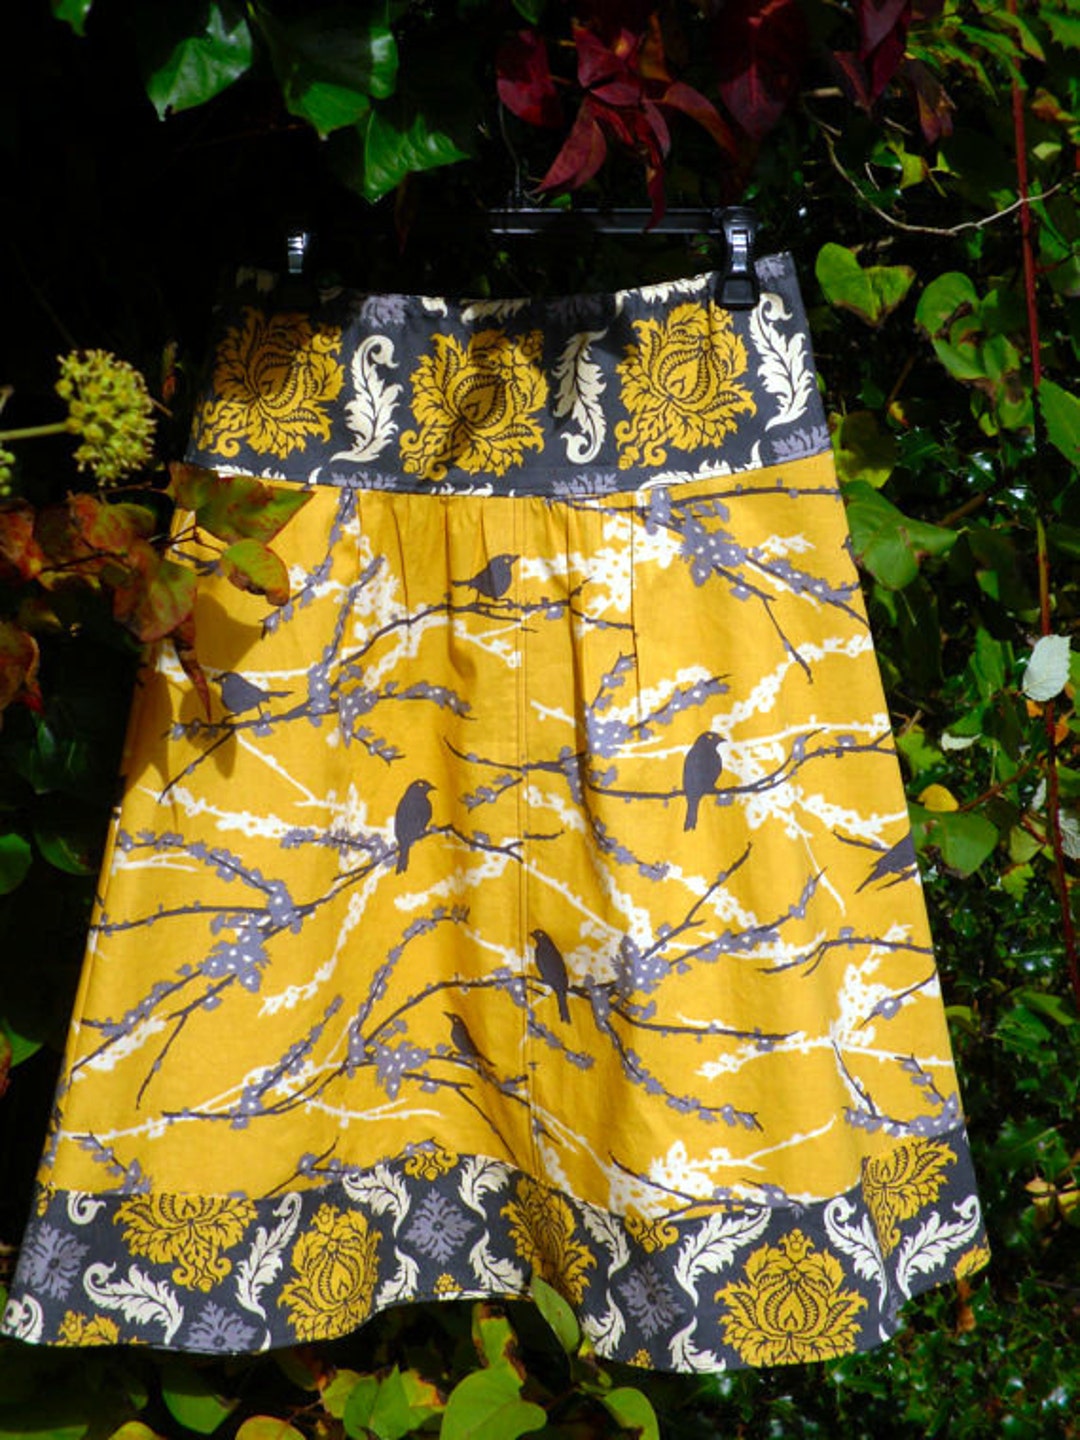 A-line Skirt Mustard Yellow and Gray Sparrows and Damas - Etsy